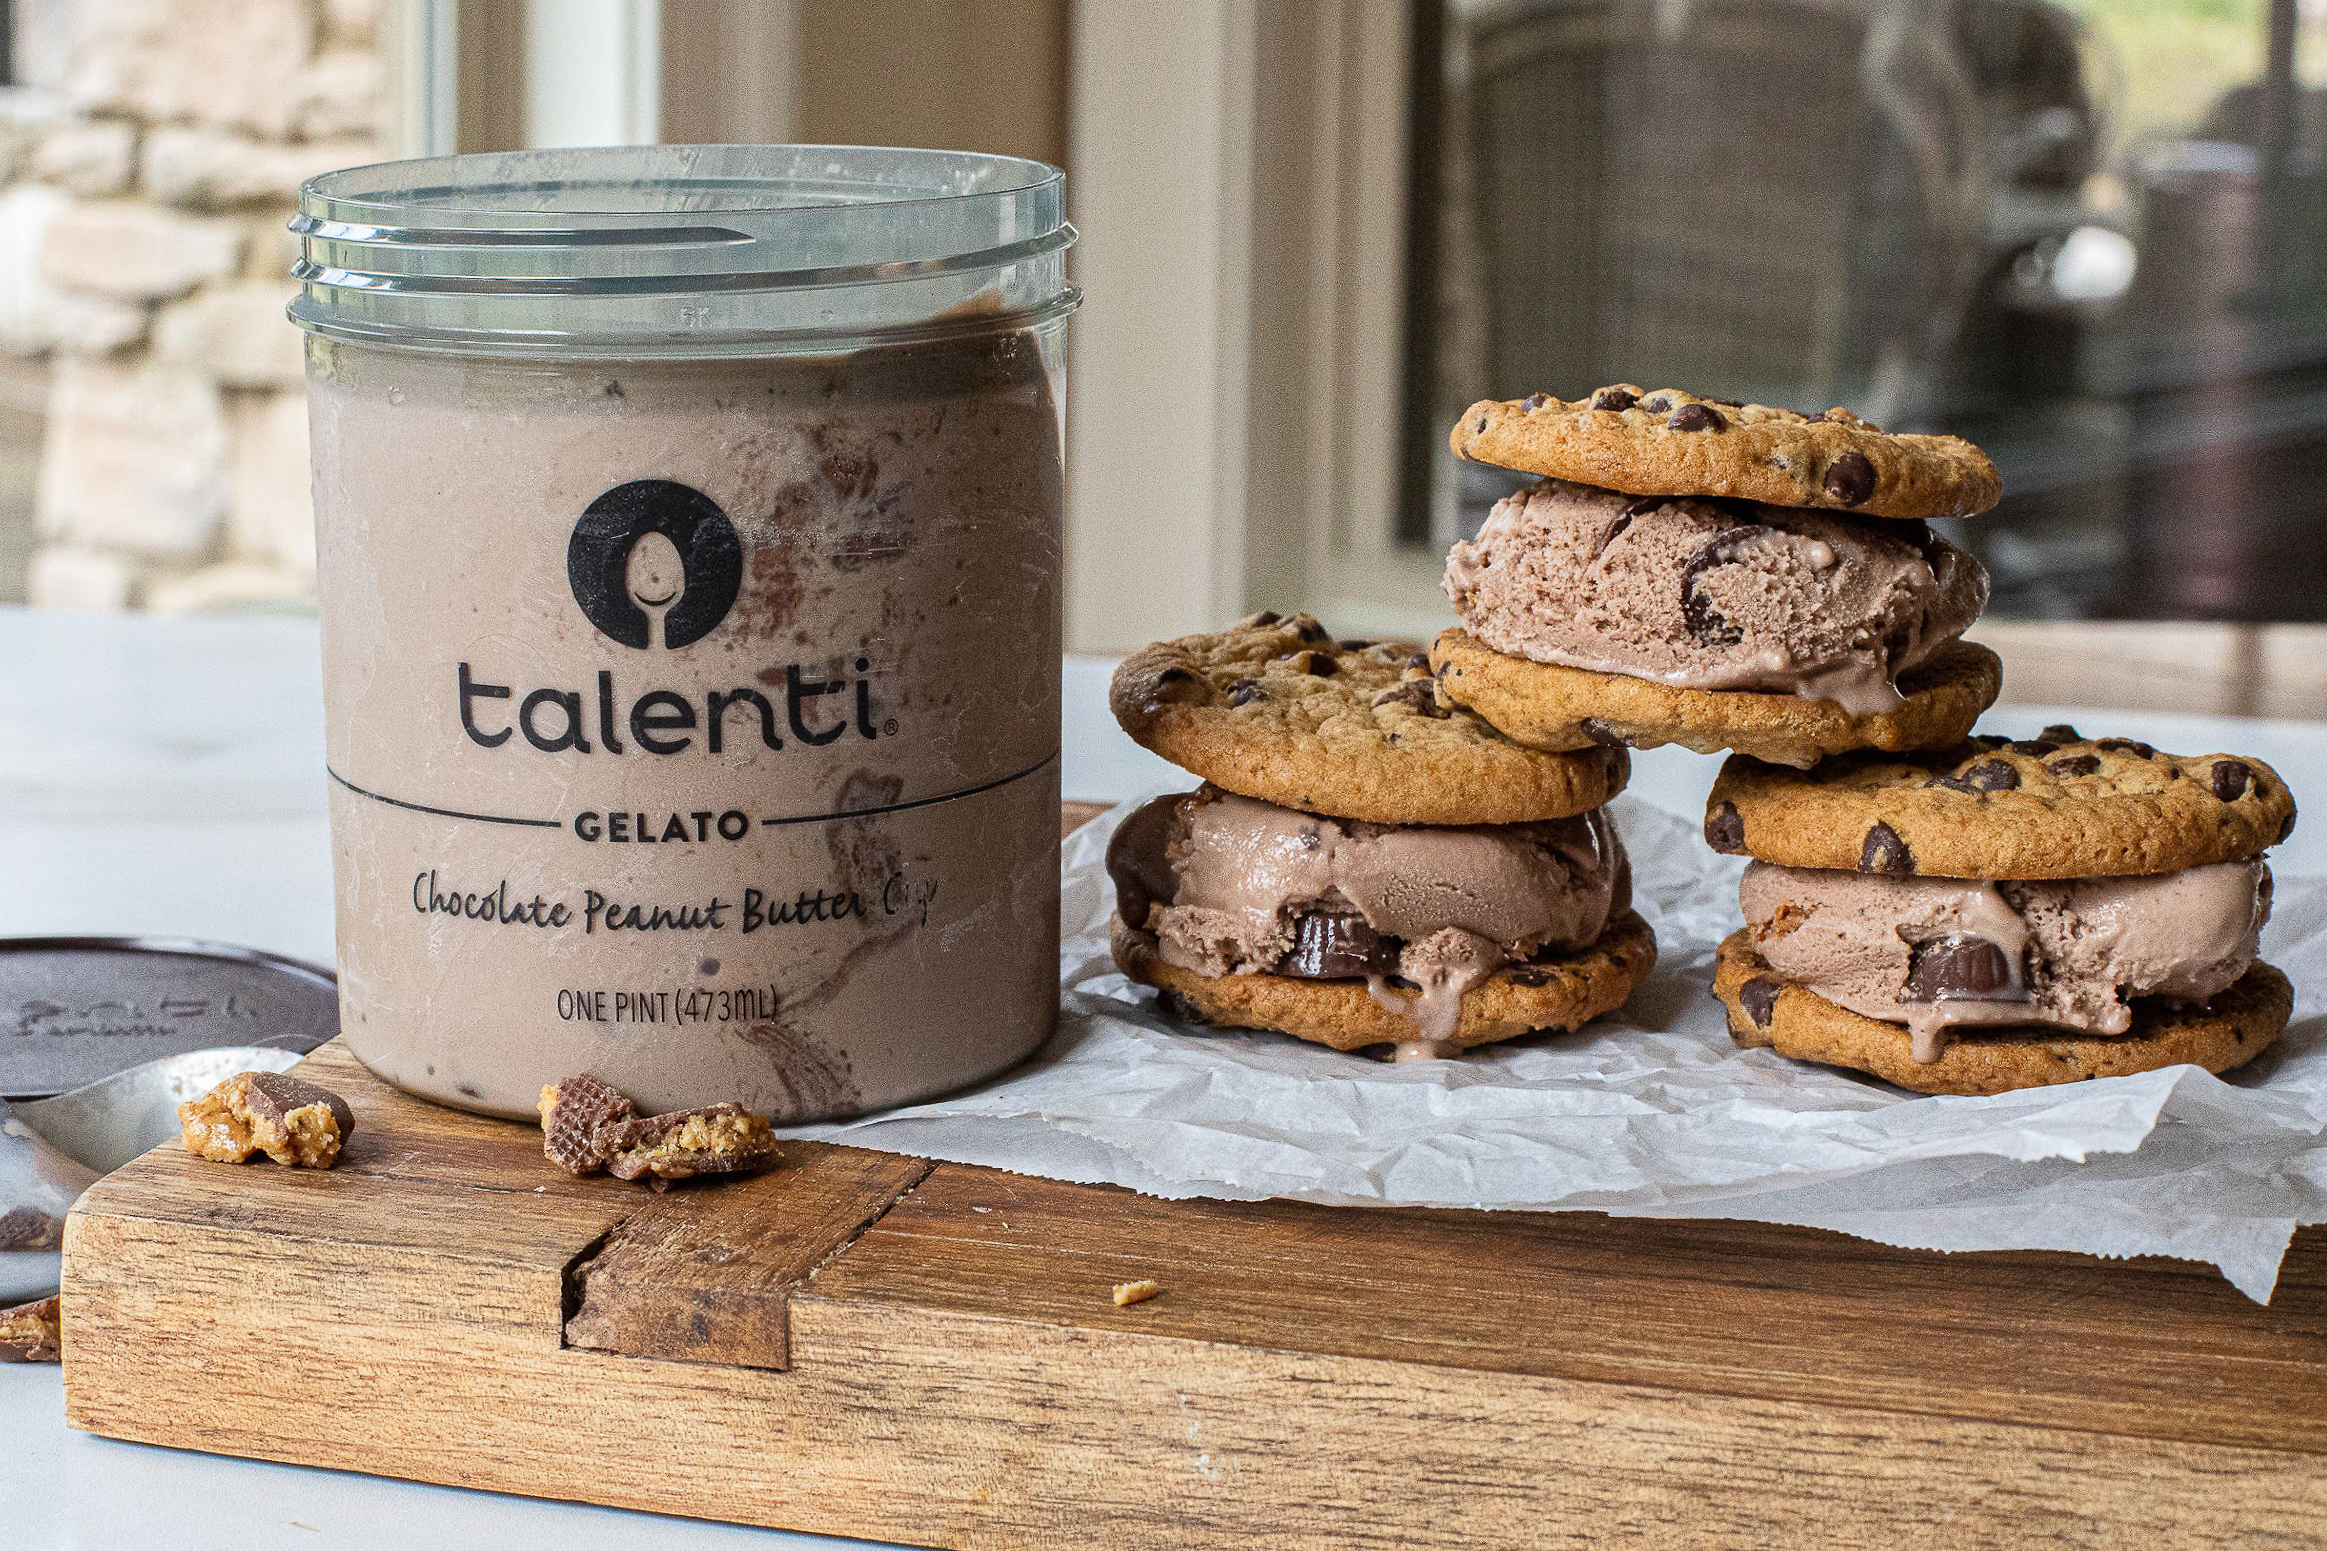 Your Favorite Talenti Gelato Is On Sale NOW At Publix - Buy One, Get One FREE! on I Heart Publix